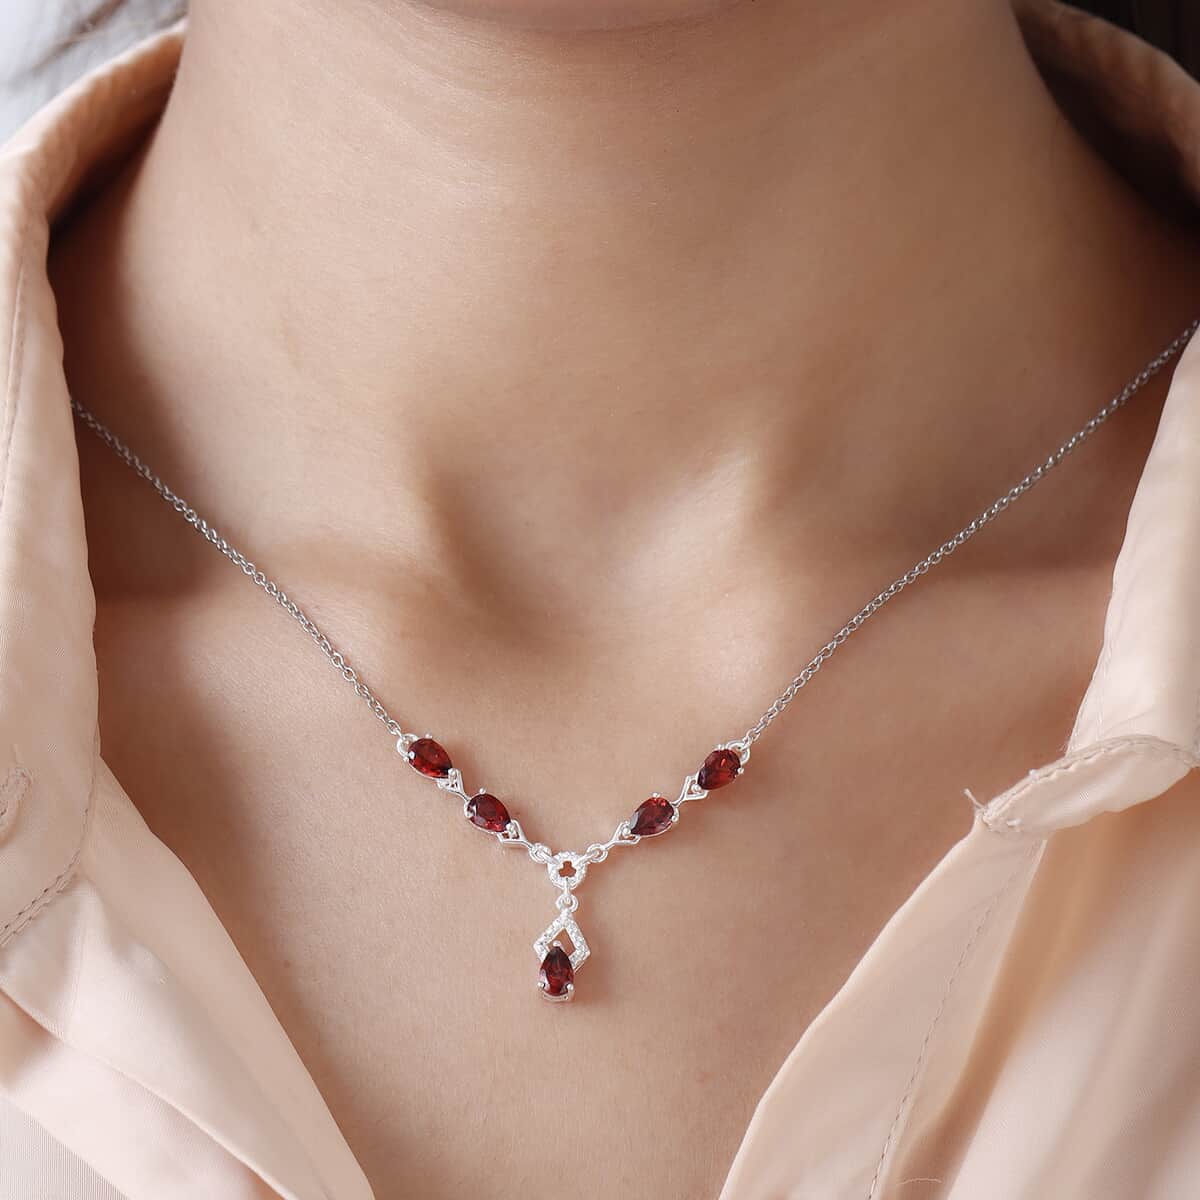 Mozambique Garnet Necklace in Platinum Over Sterling Silver and Stainless Steel, Red Fashion Necklace, Wedding Gifts For Women  2.50 ctw  (18 Inches) image number 3